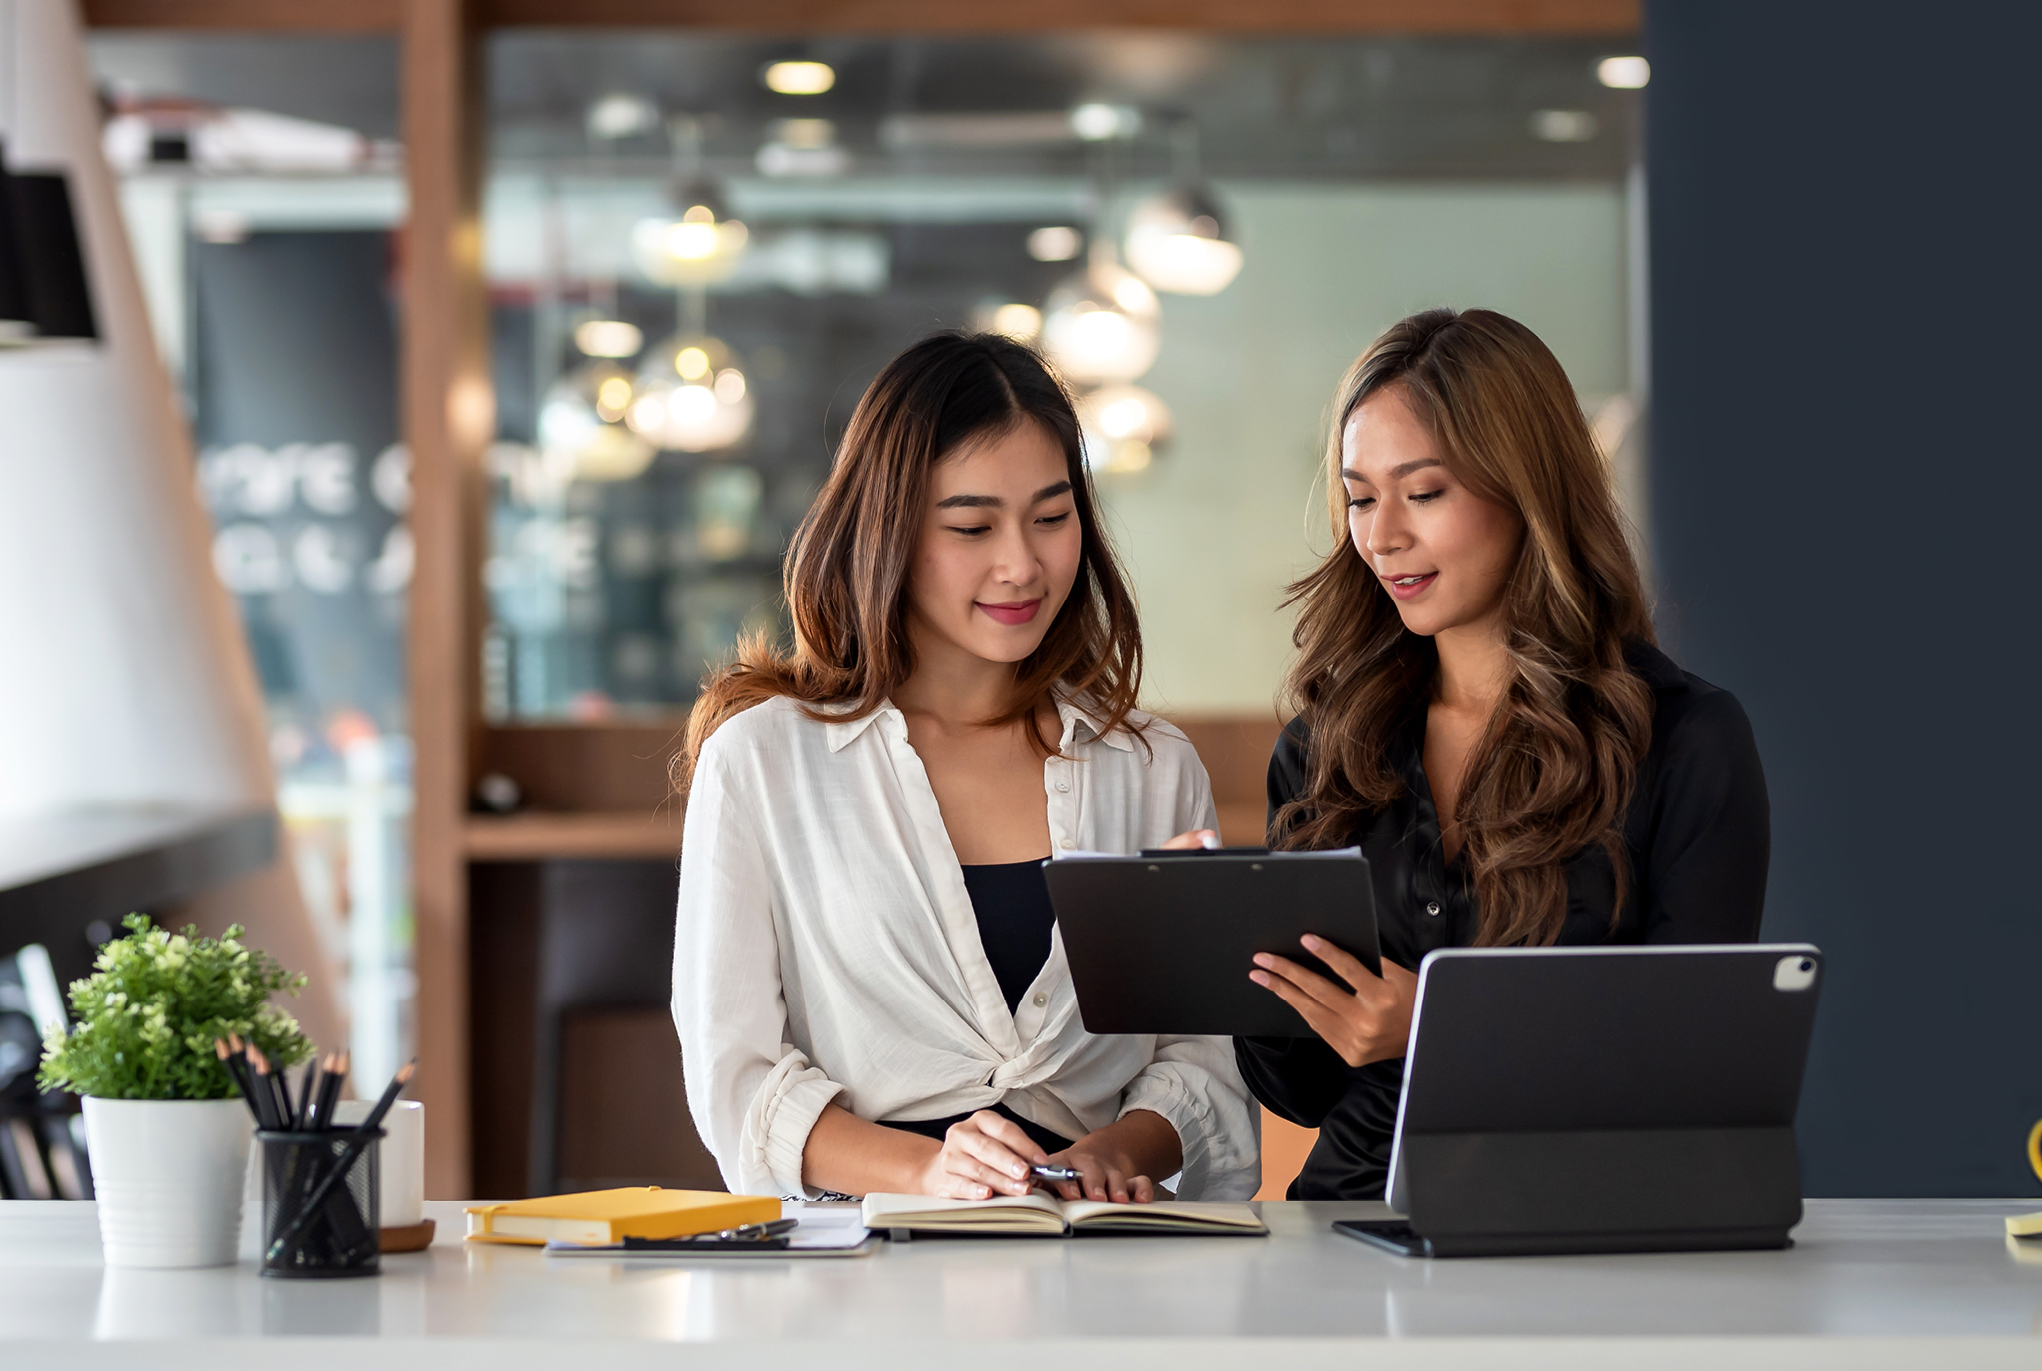 Two women in an office looking at a tablet together